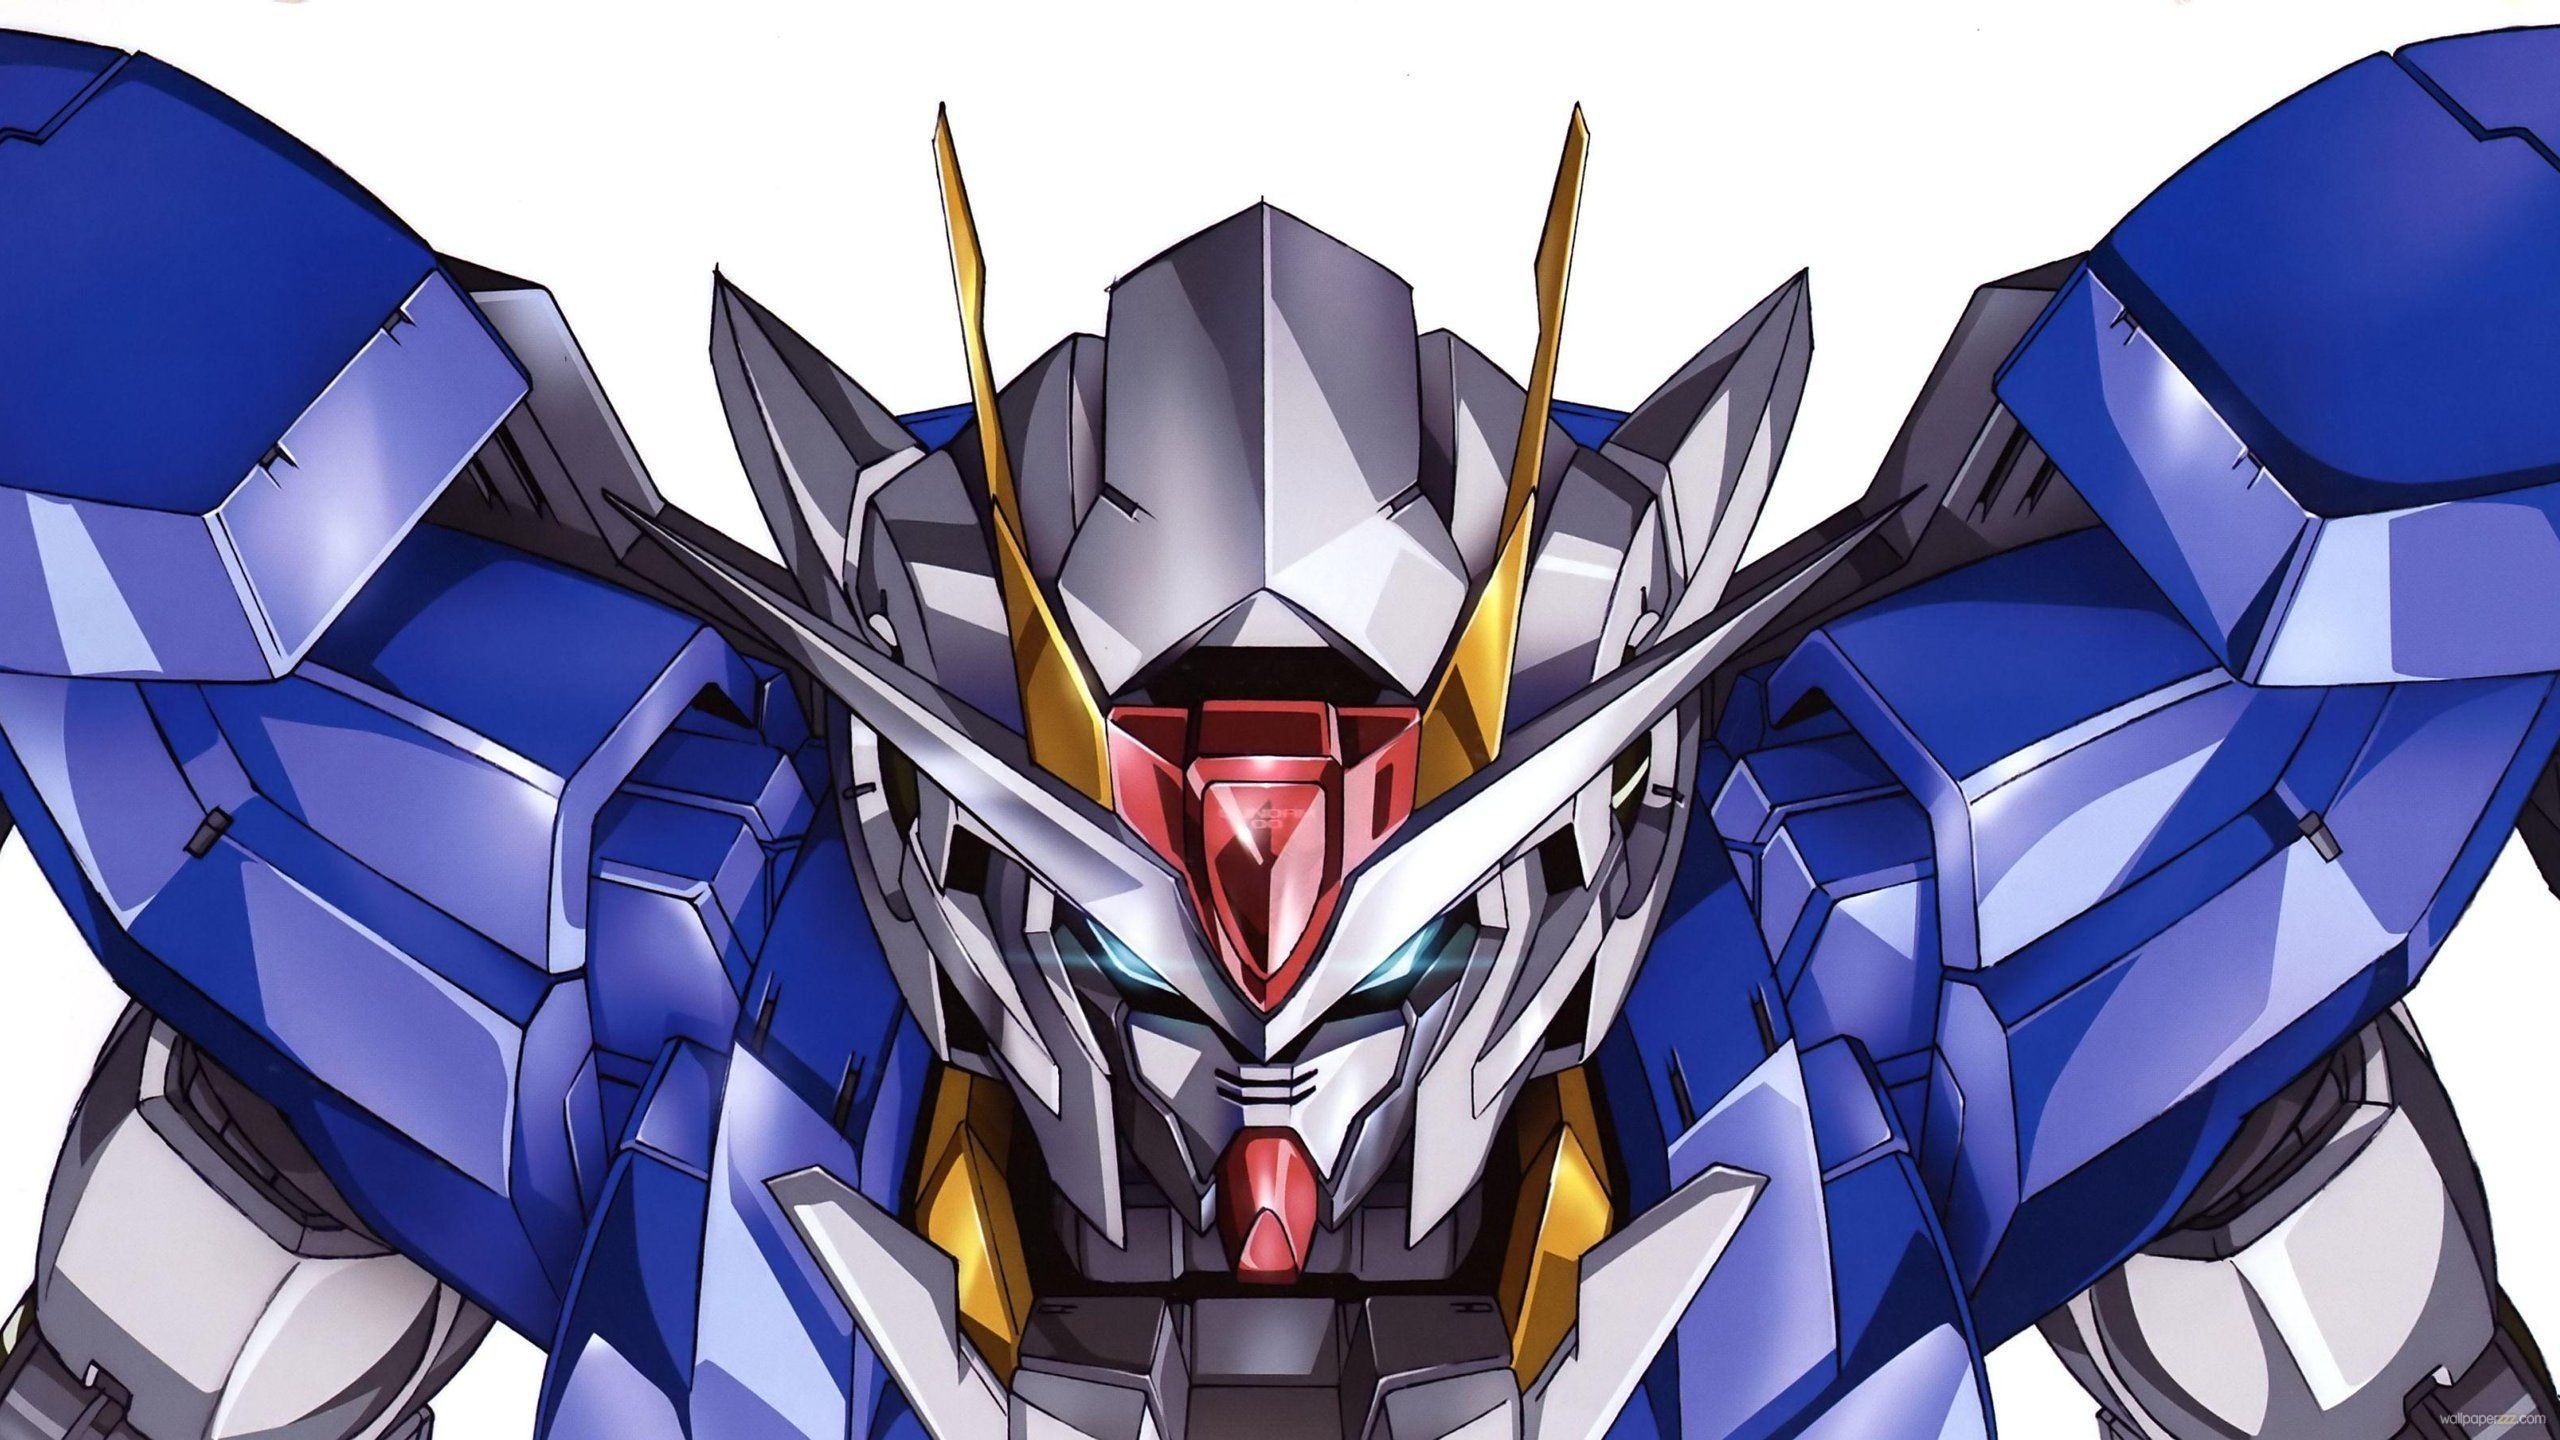 2560x1440 Explore and share Mobile Suit Gundam 00 Wallpaper